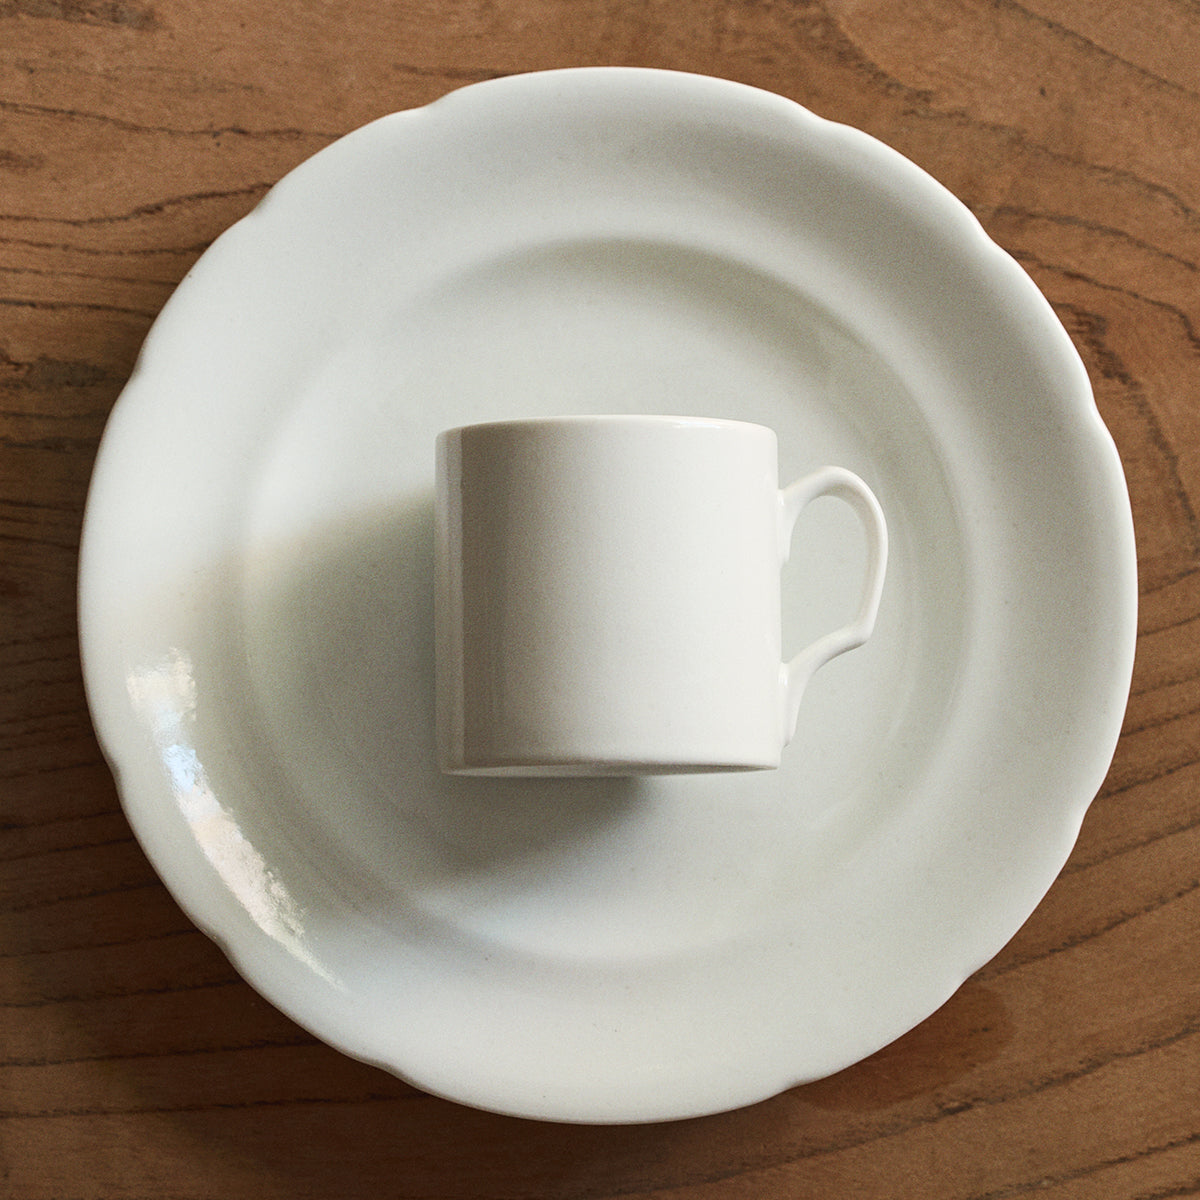 Paperwhite coffee cup